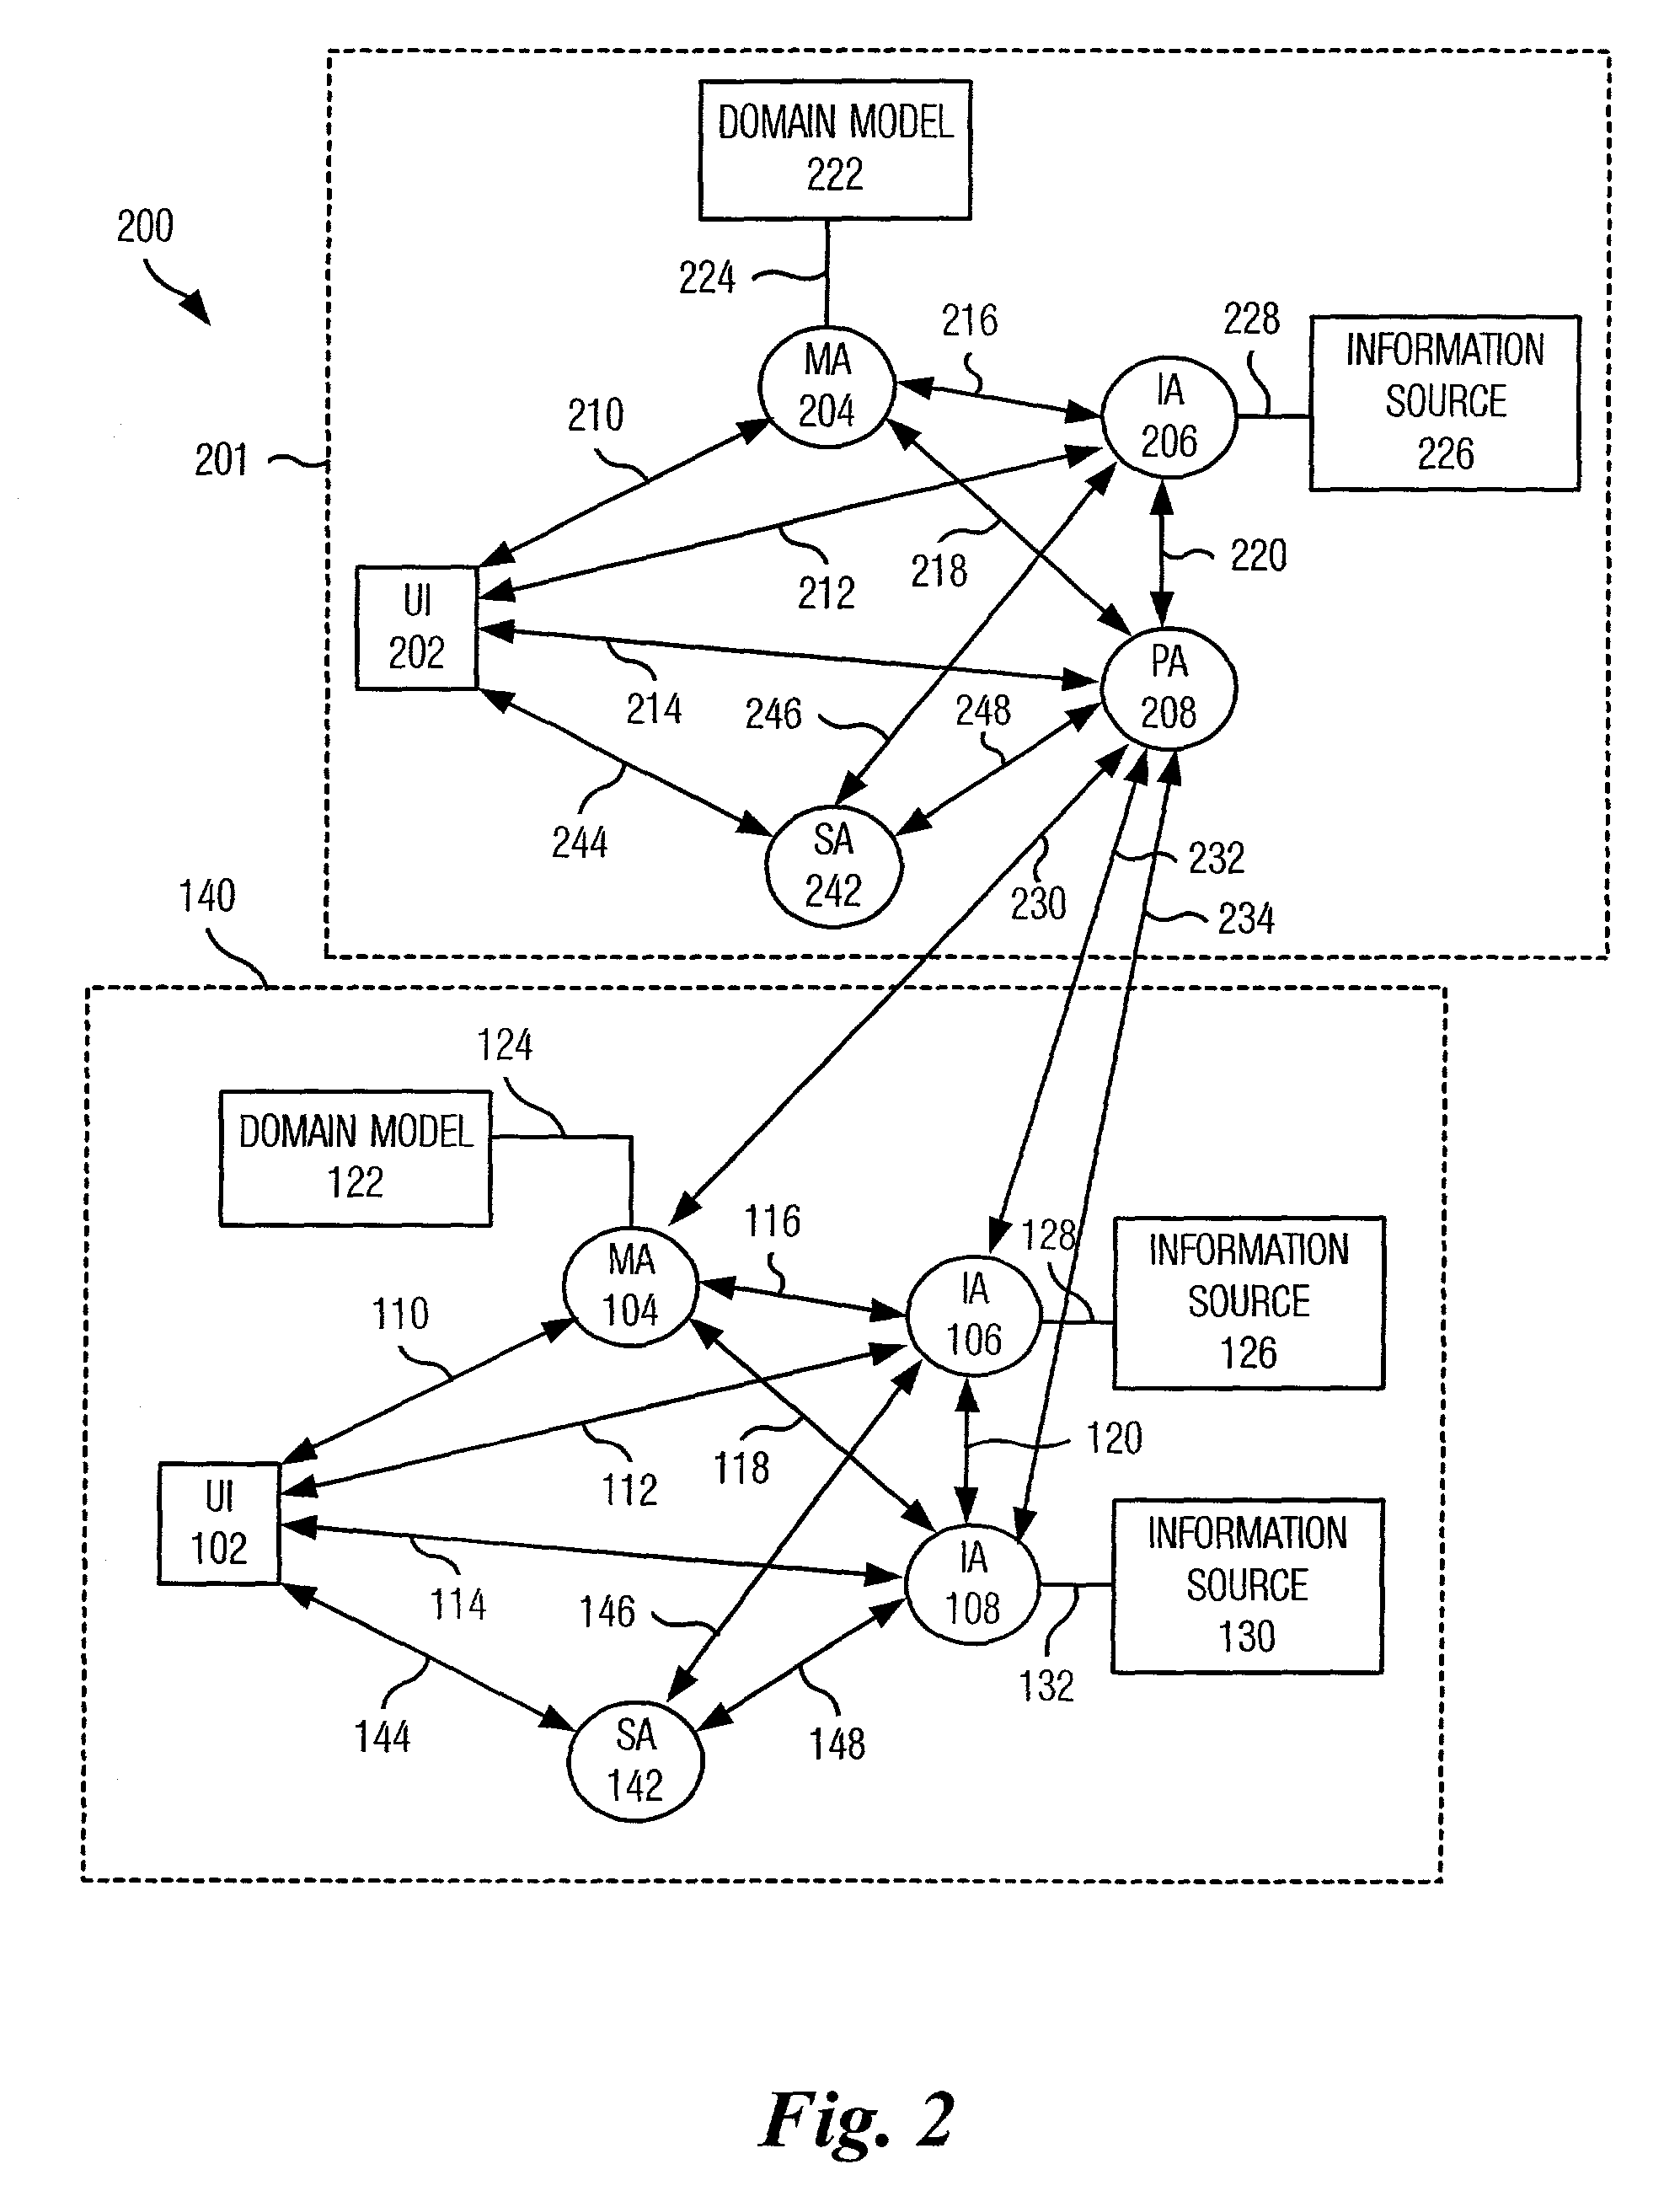 System and method for retrieving information from disparate information sources in a decentralized manner and integrating the information in accordance with a distributed domain model/ontology